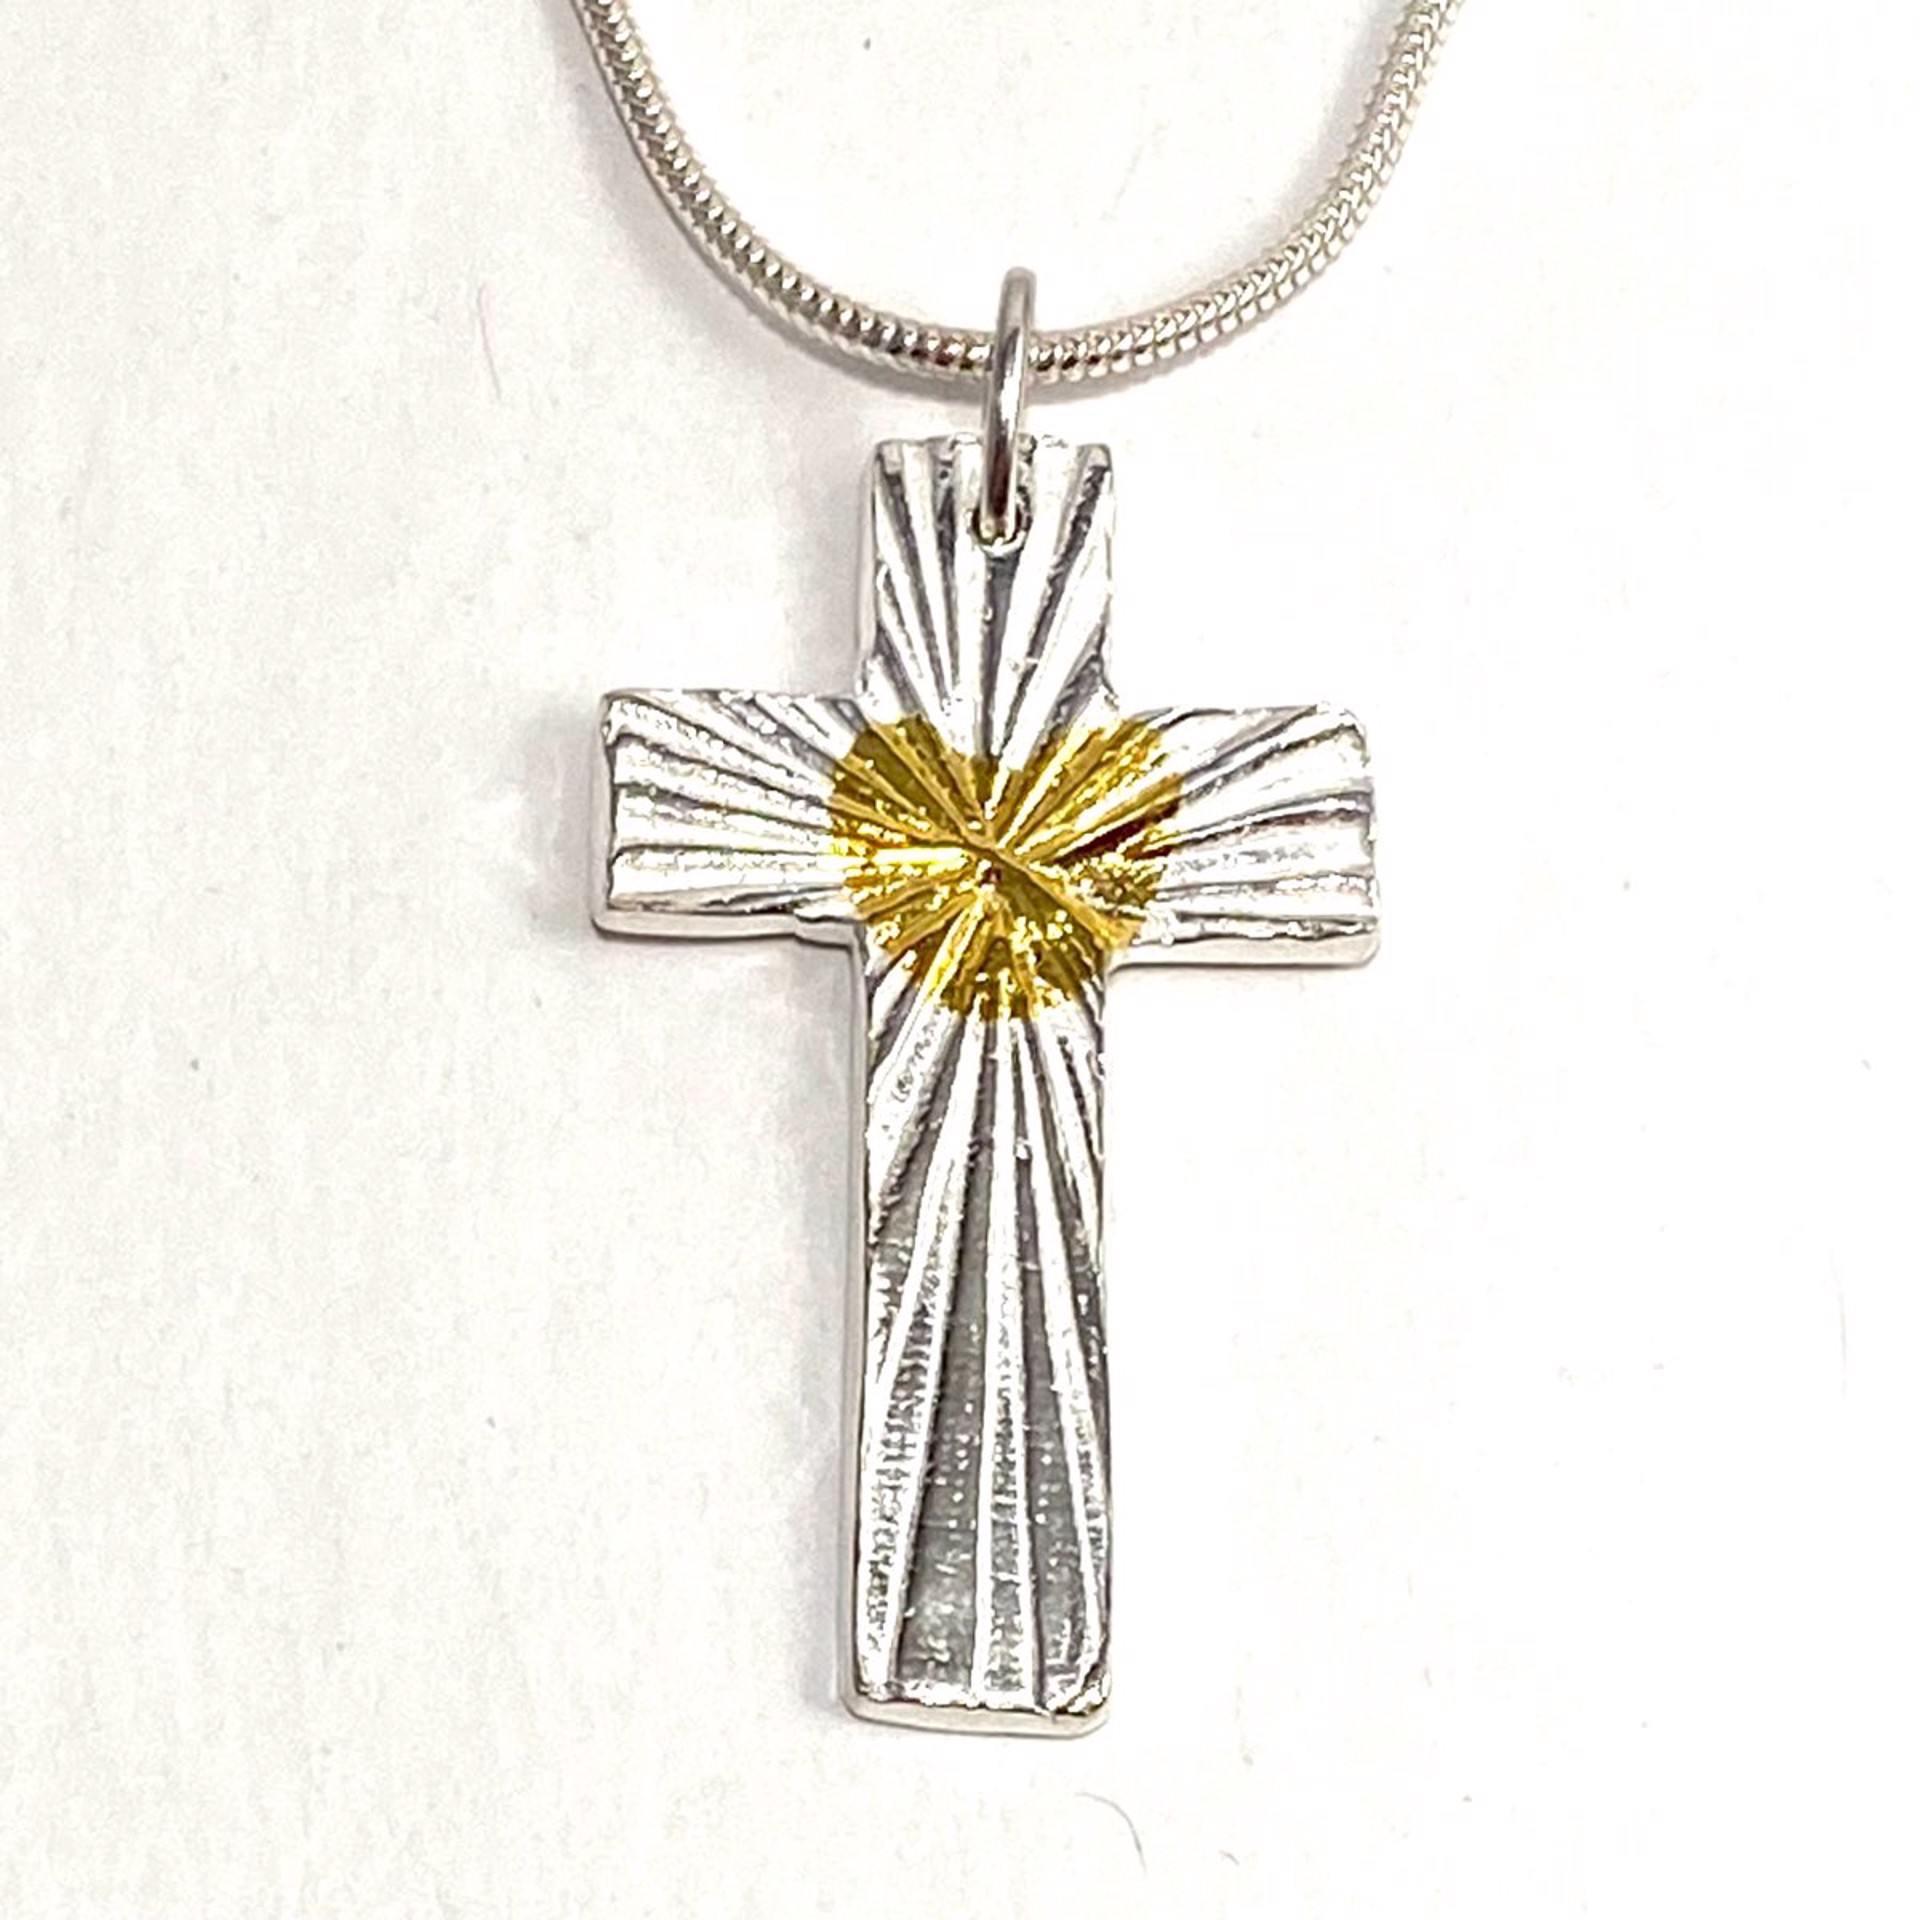 KH22-69 Keum-Boo Fine Silver and Gold Reversible Cross Necklace by Karen Hakim